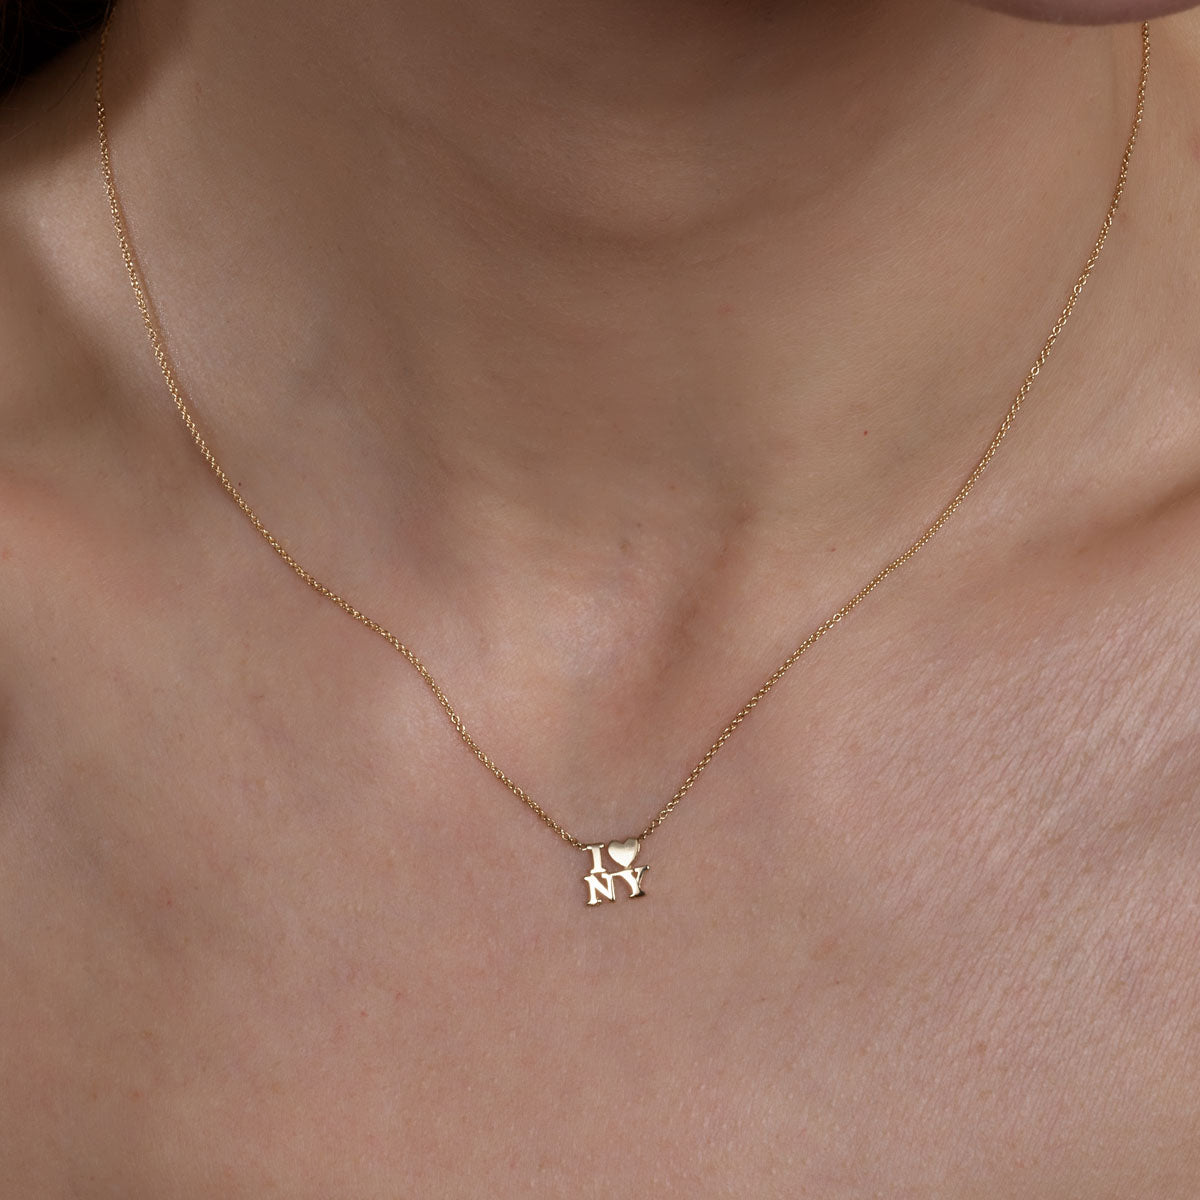 gold i heart NY necklace on womans neck